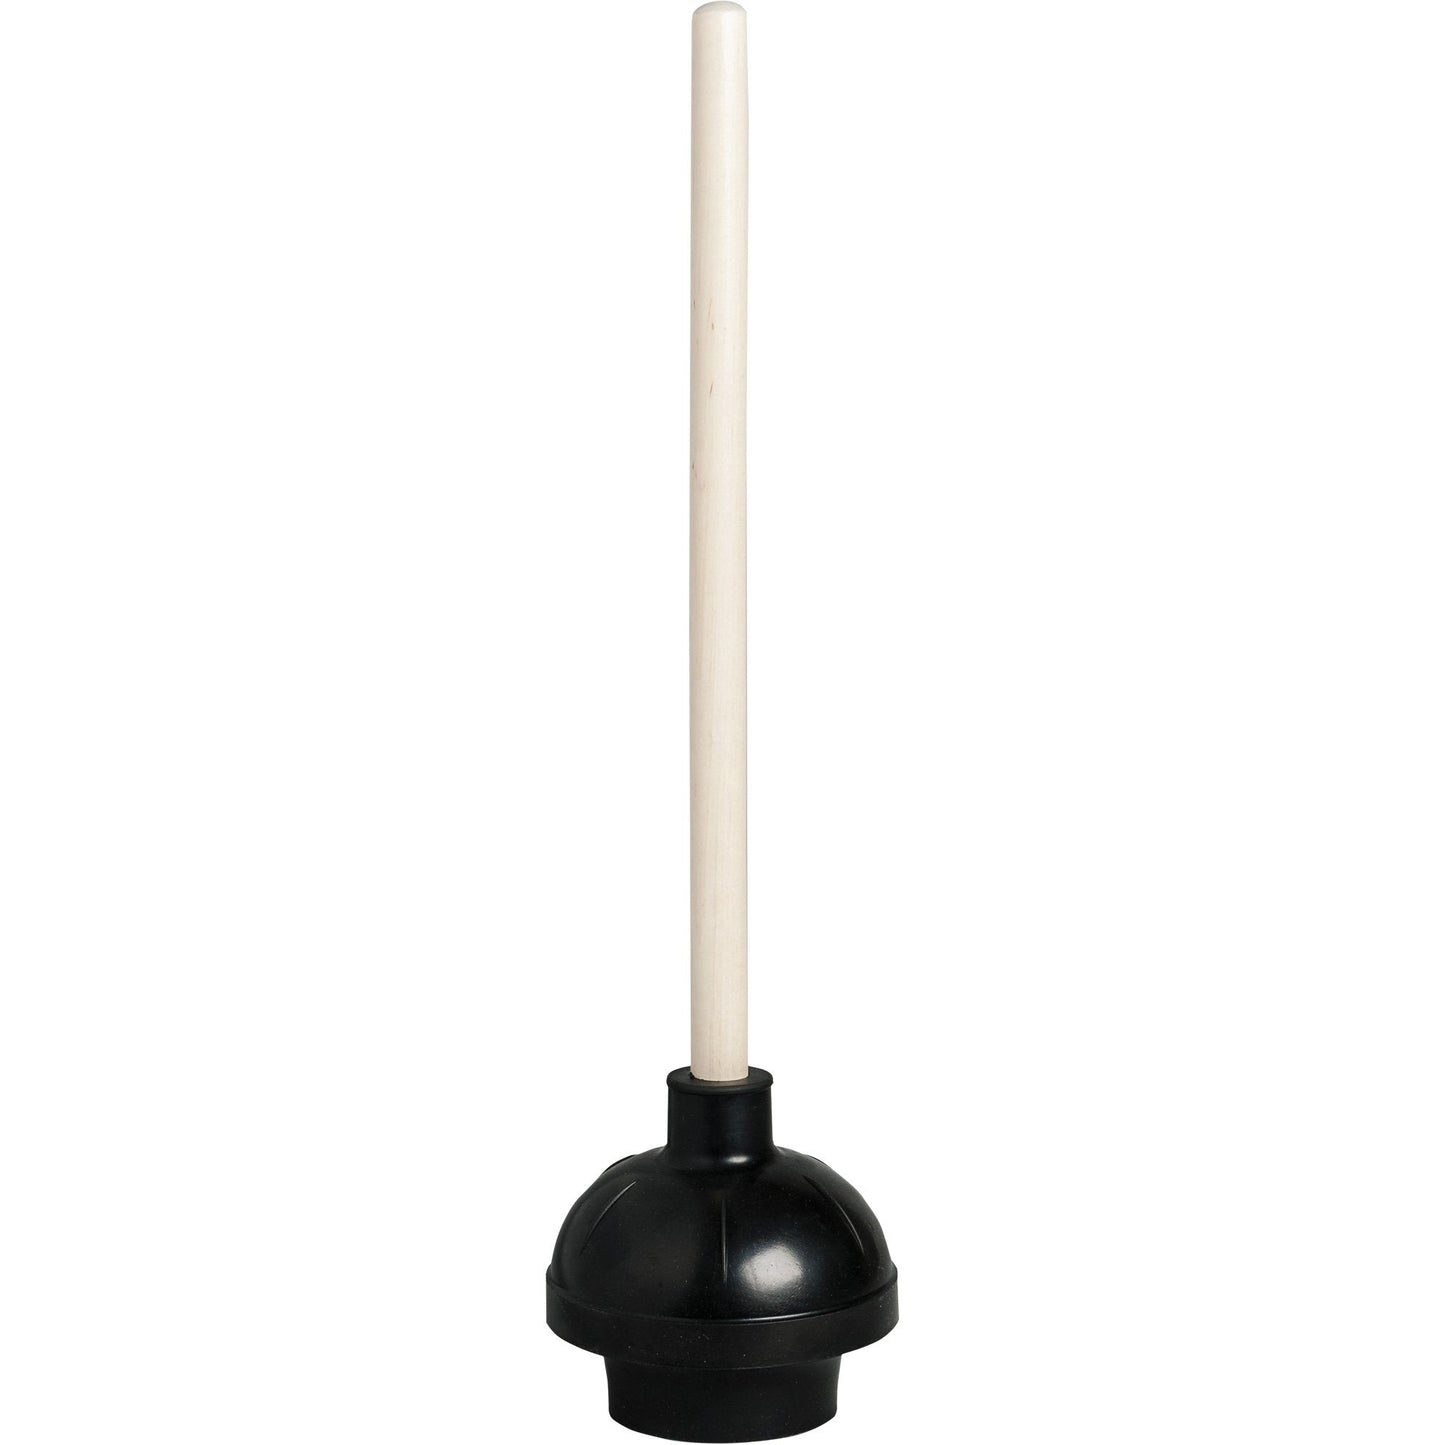 M2 HD Plunger w/Wood Handle